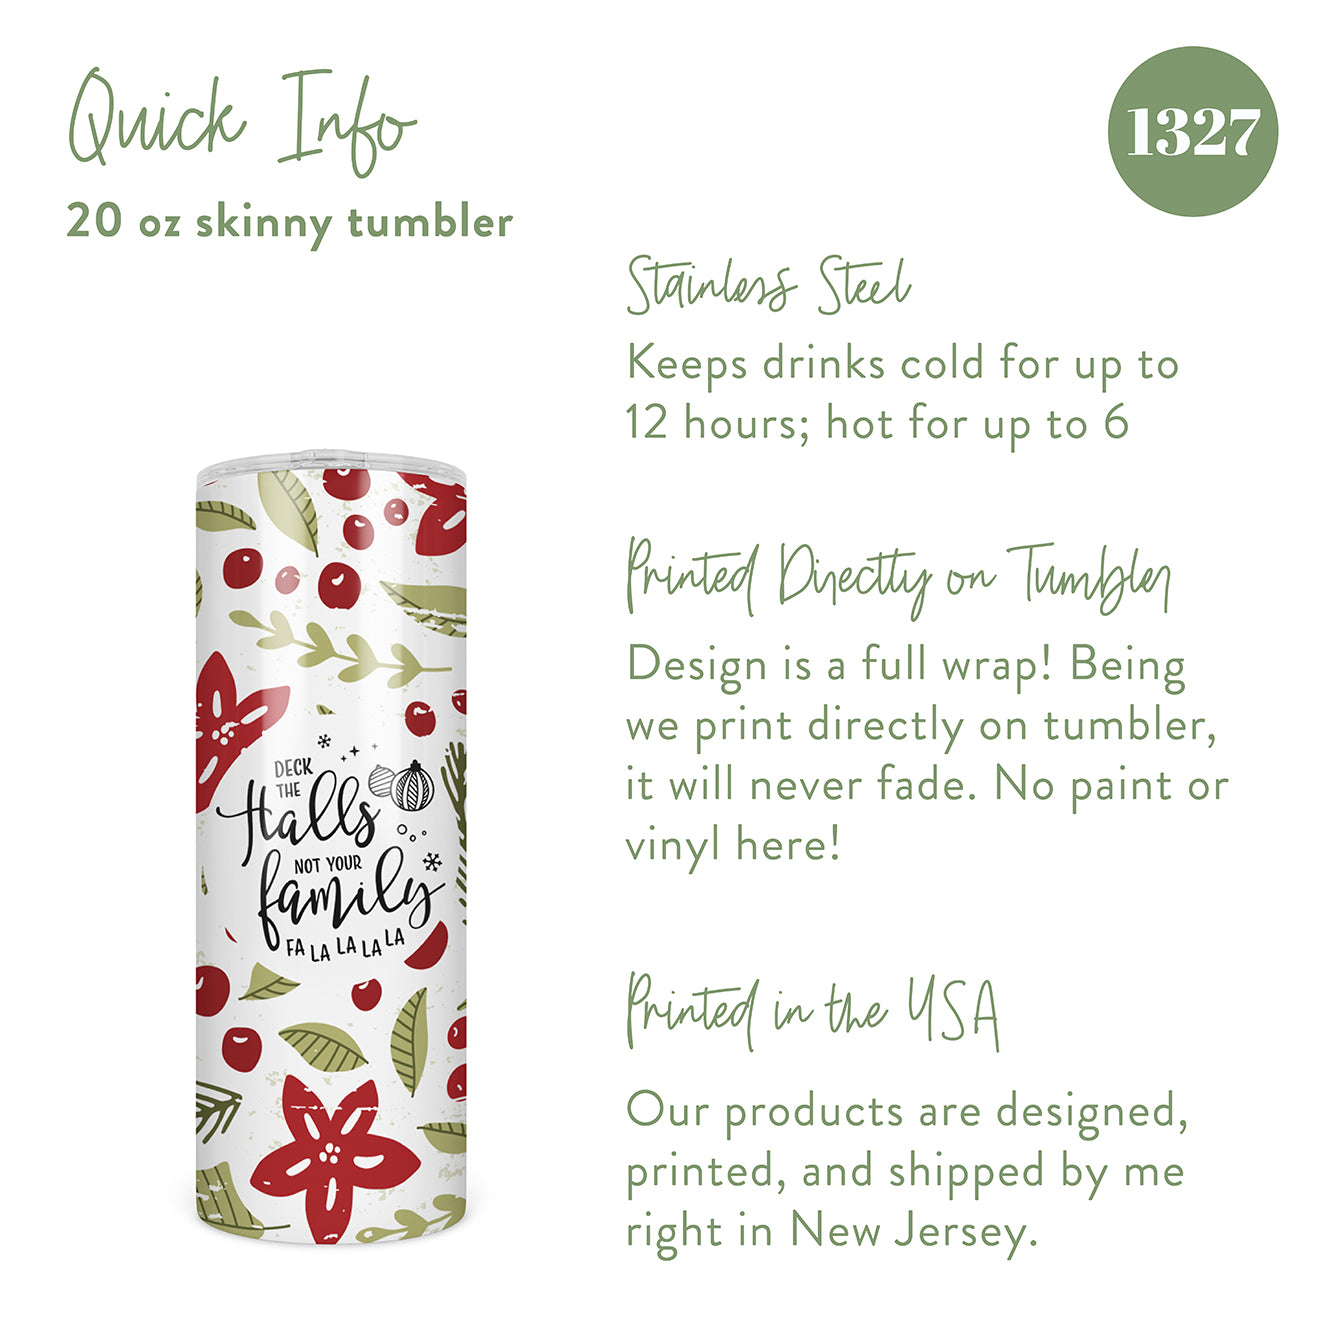 Deck the Halls and Not Your Family Skinny Tumbler